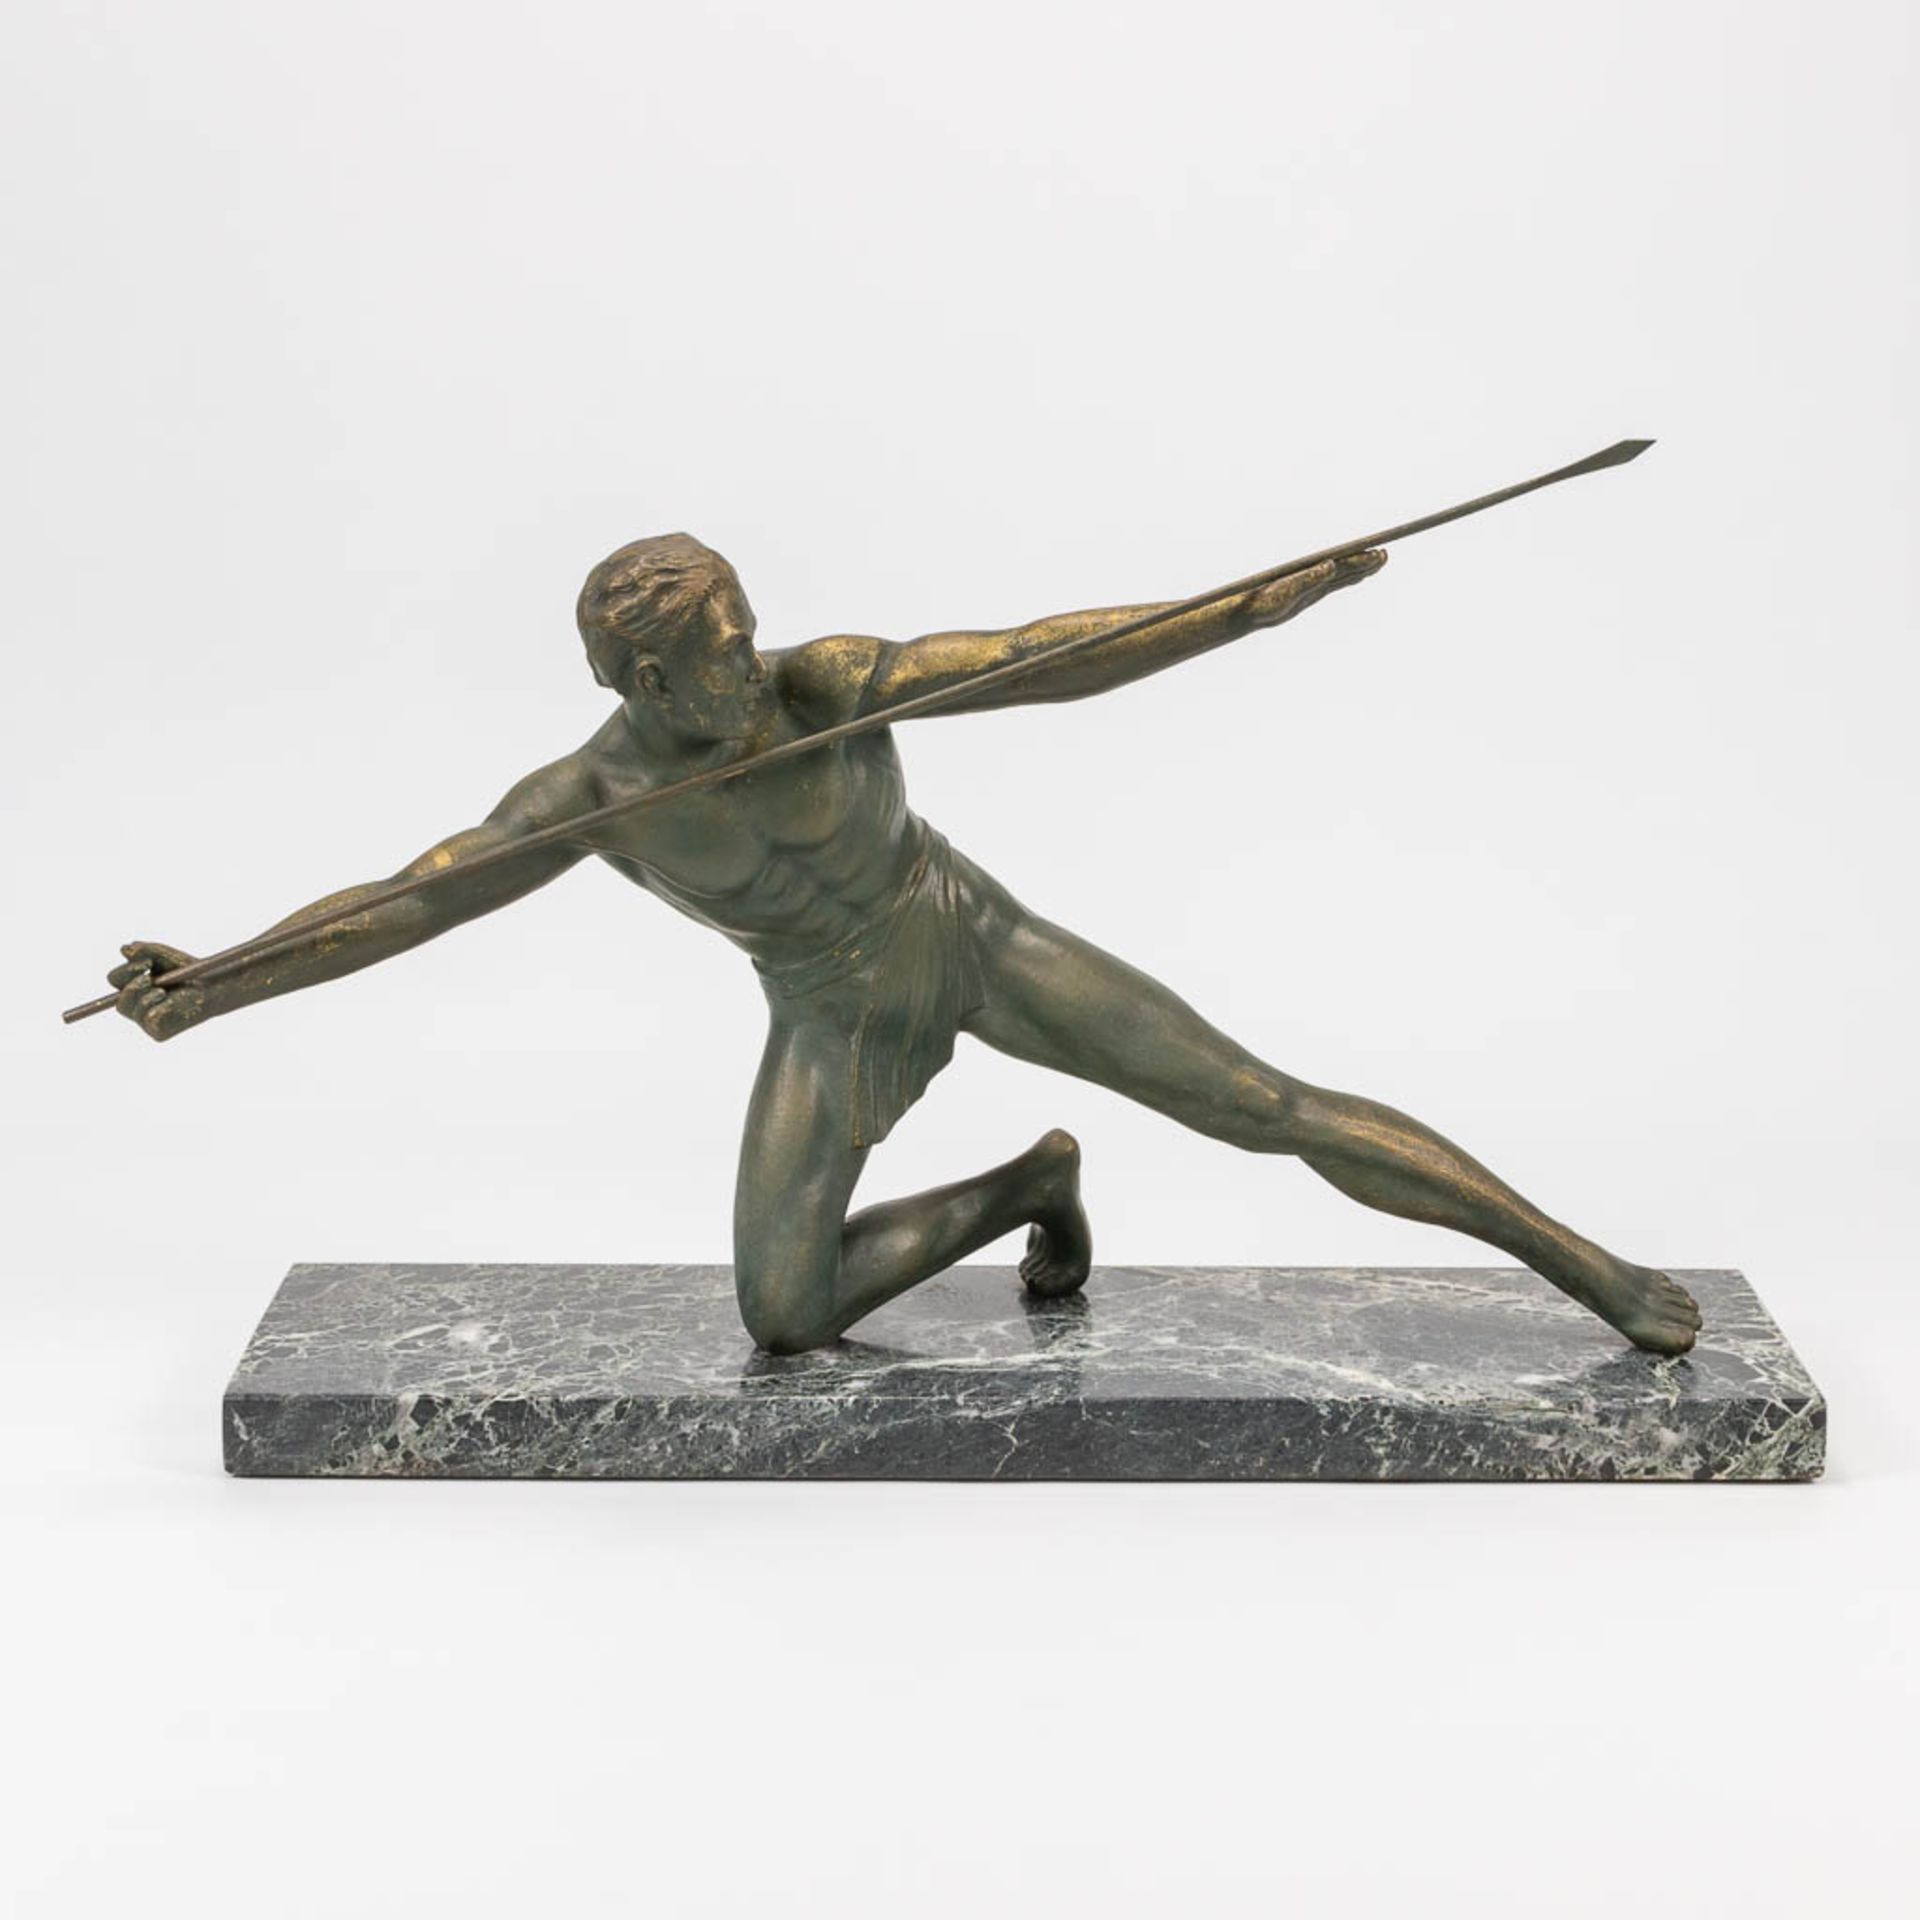 A bronze statue of a spear thrower in art deco style and standing on a marble base. The first half o